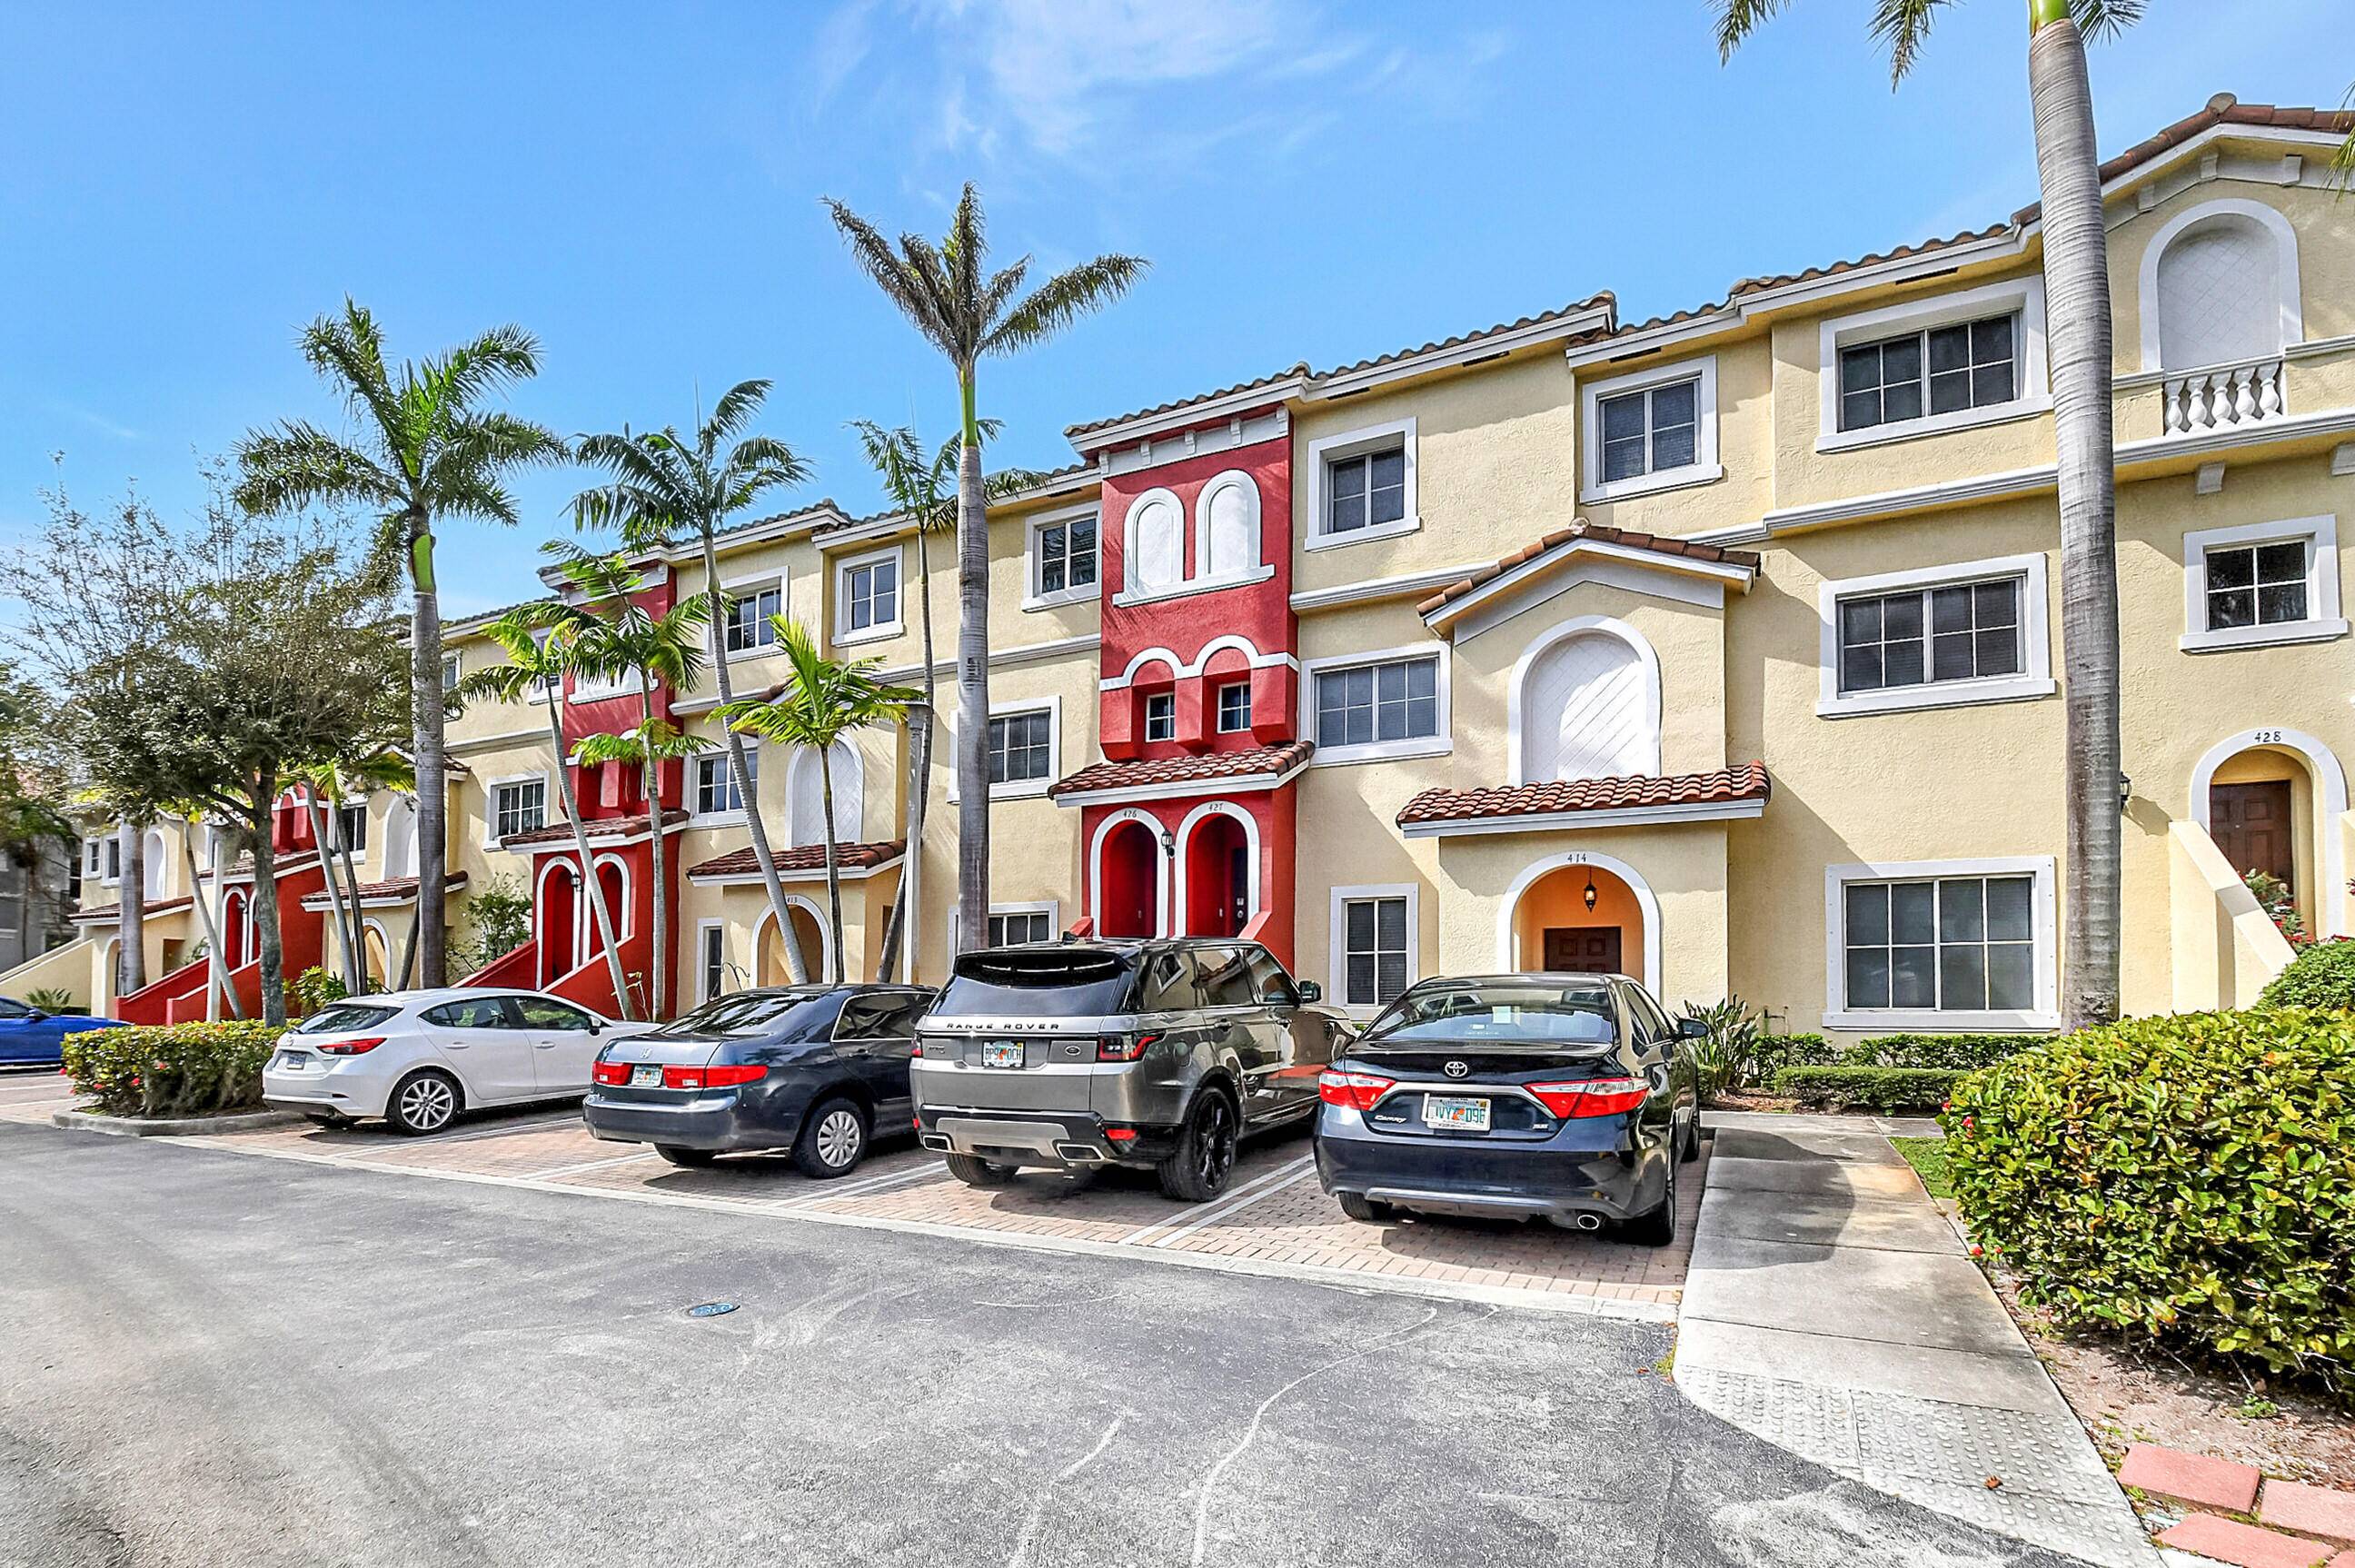 This very Quaint Bayfront condo community is centrally located near beaches as well as downtown Delray Beach with the finest restaurants, art galleries and boutiques.